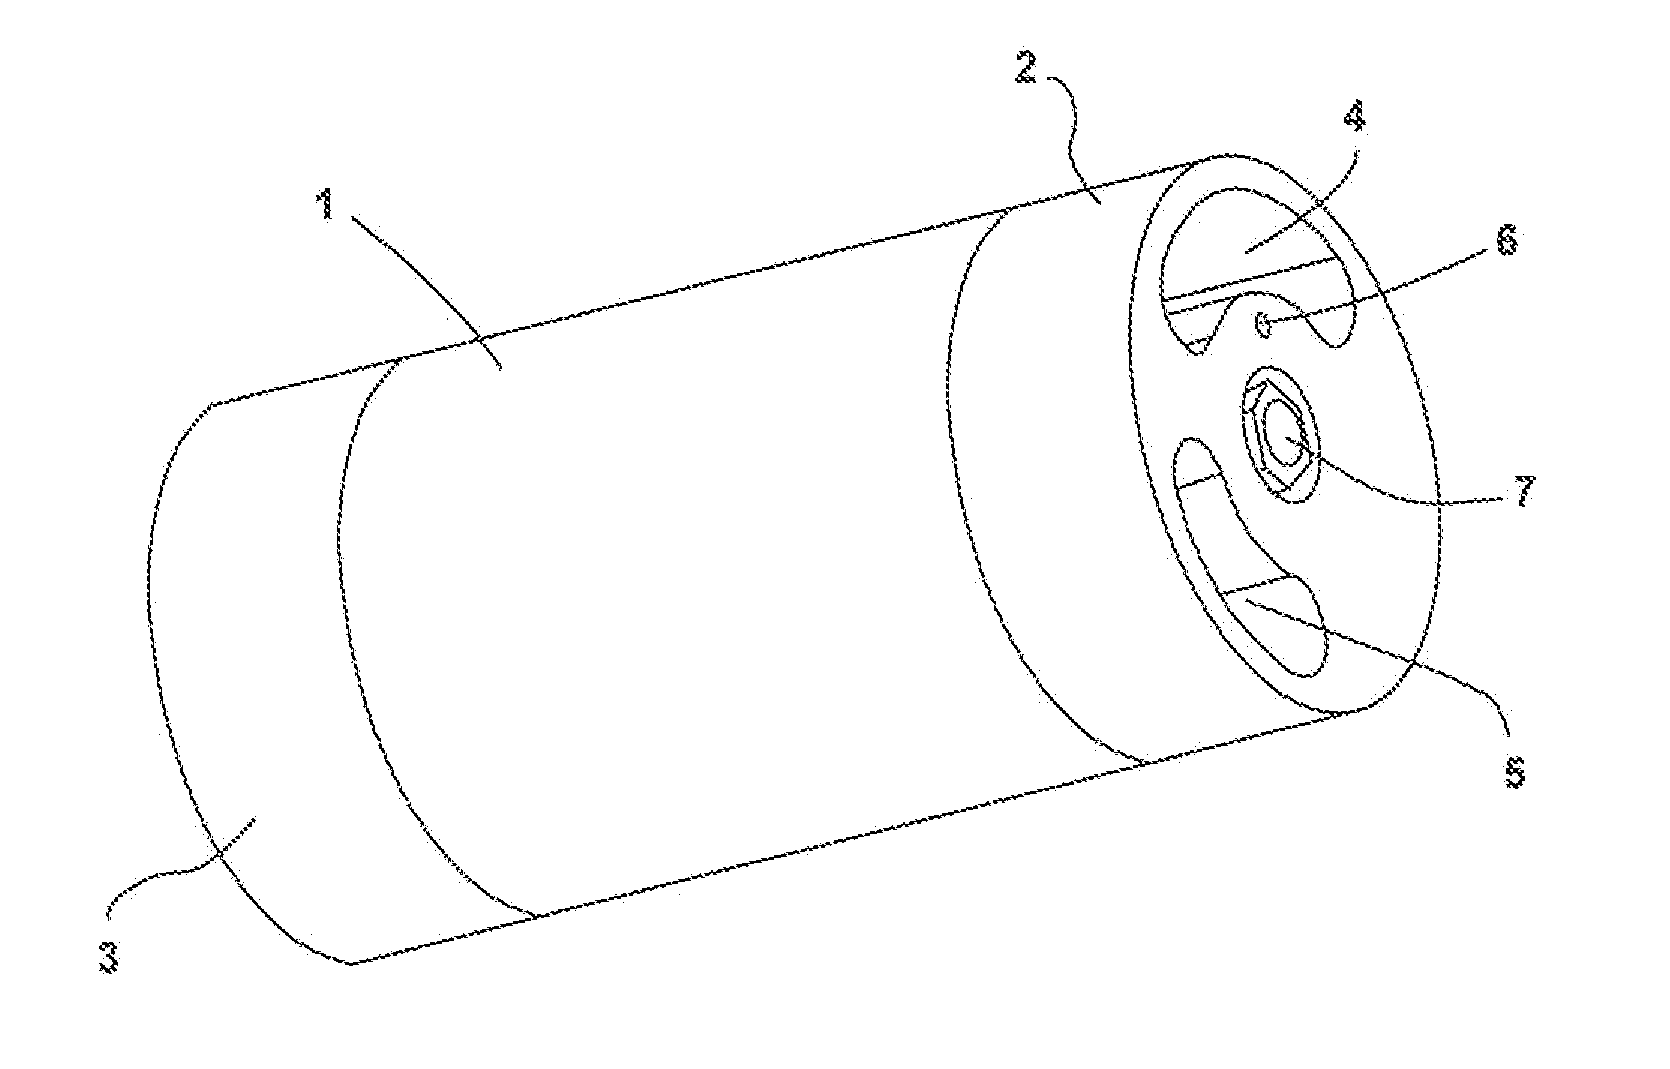 Rotor positioning system in a pressure exchange vessel